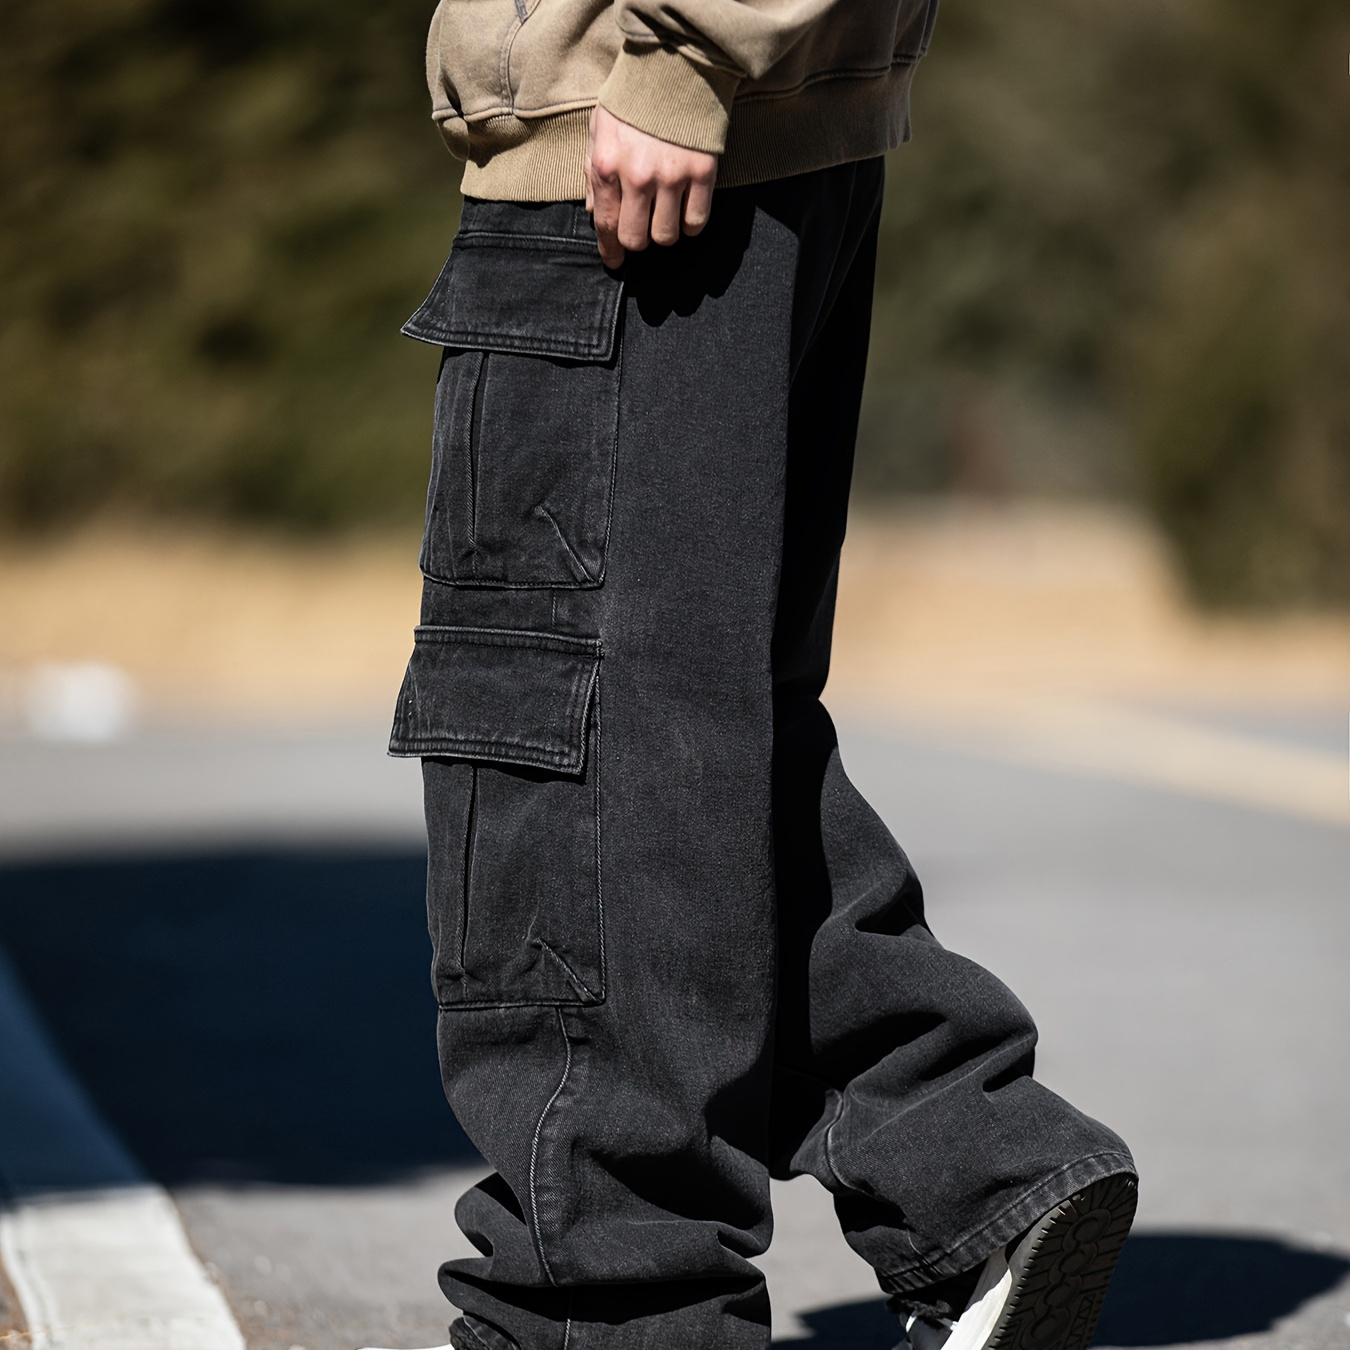 

Men's Solid Cargo Pants With Multi Pockets, Causal Cotton Blend Trousers For Outdoor Activities K-pop